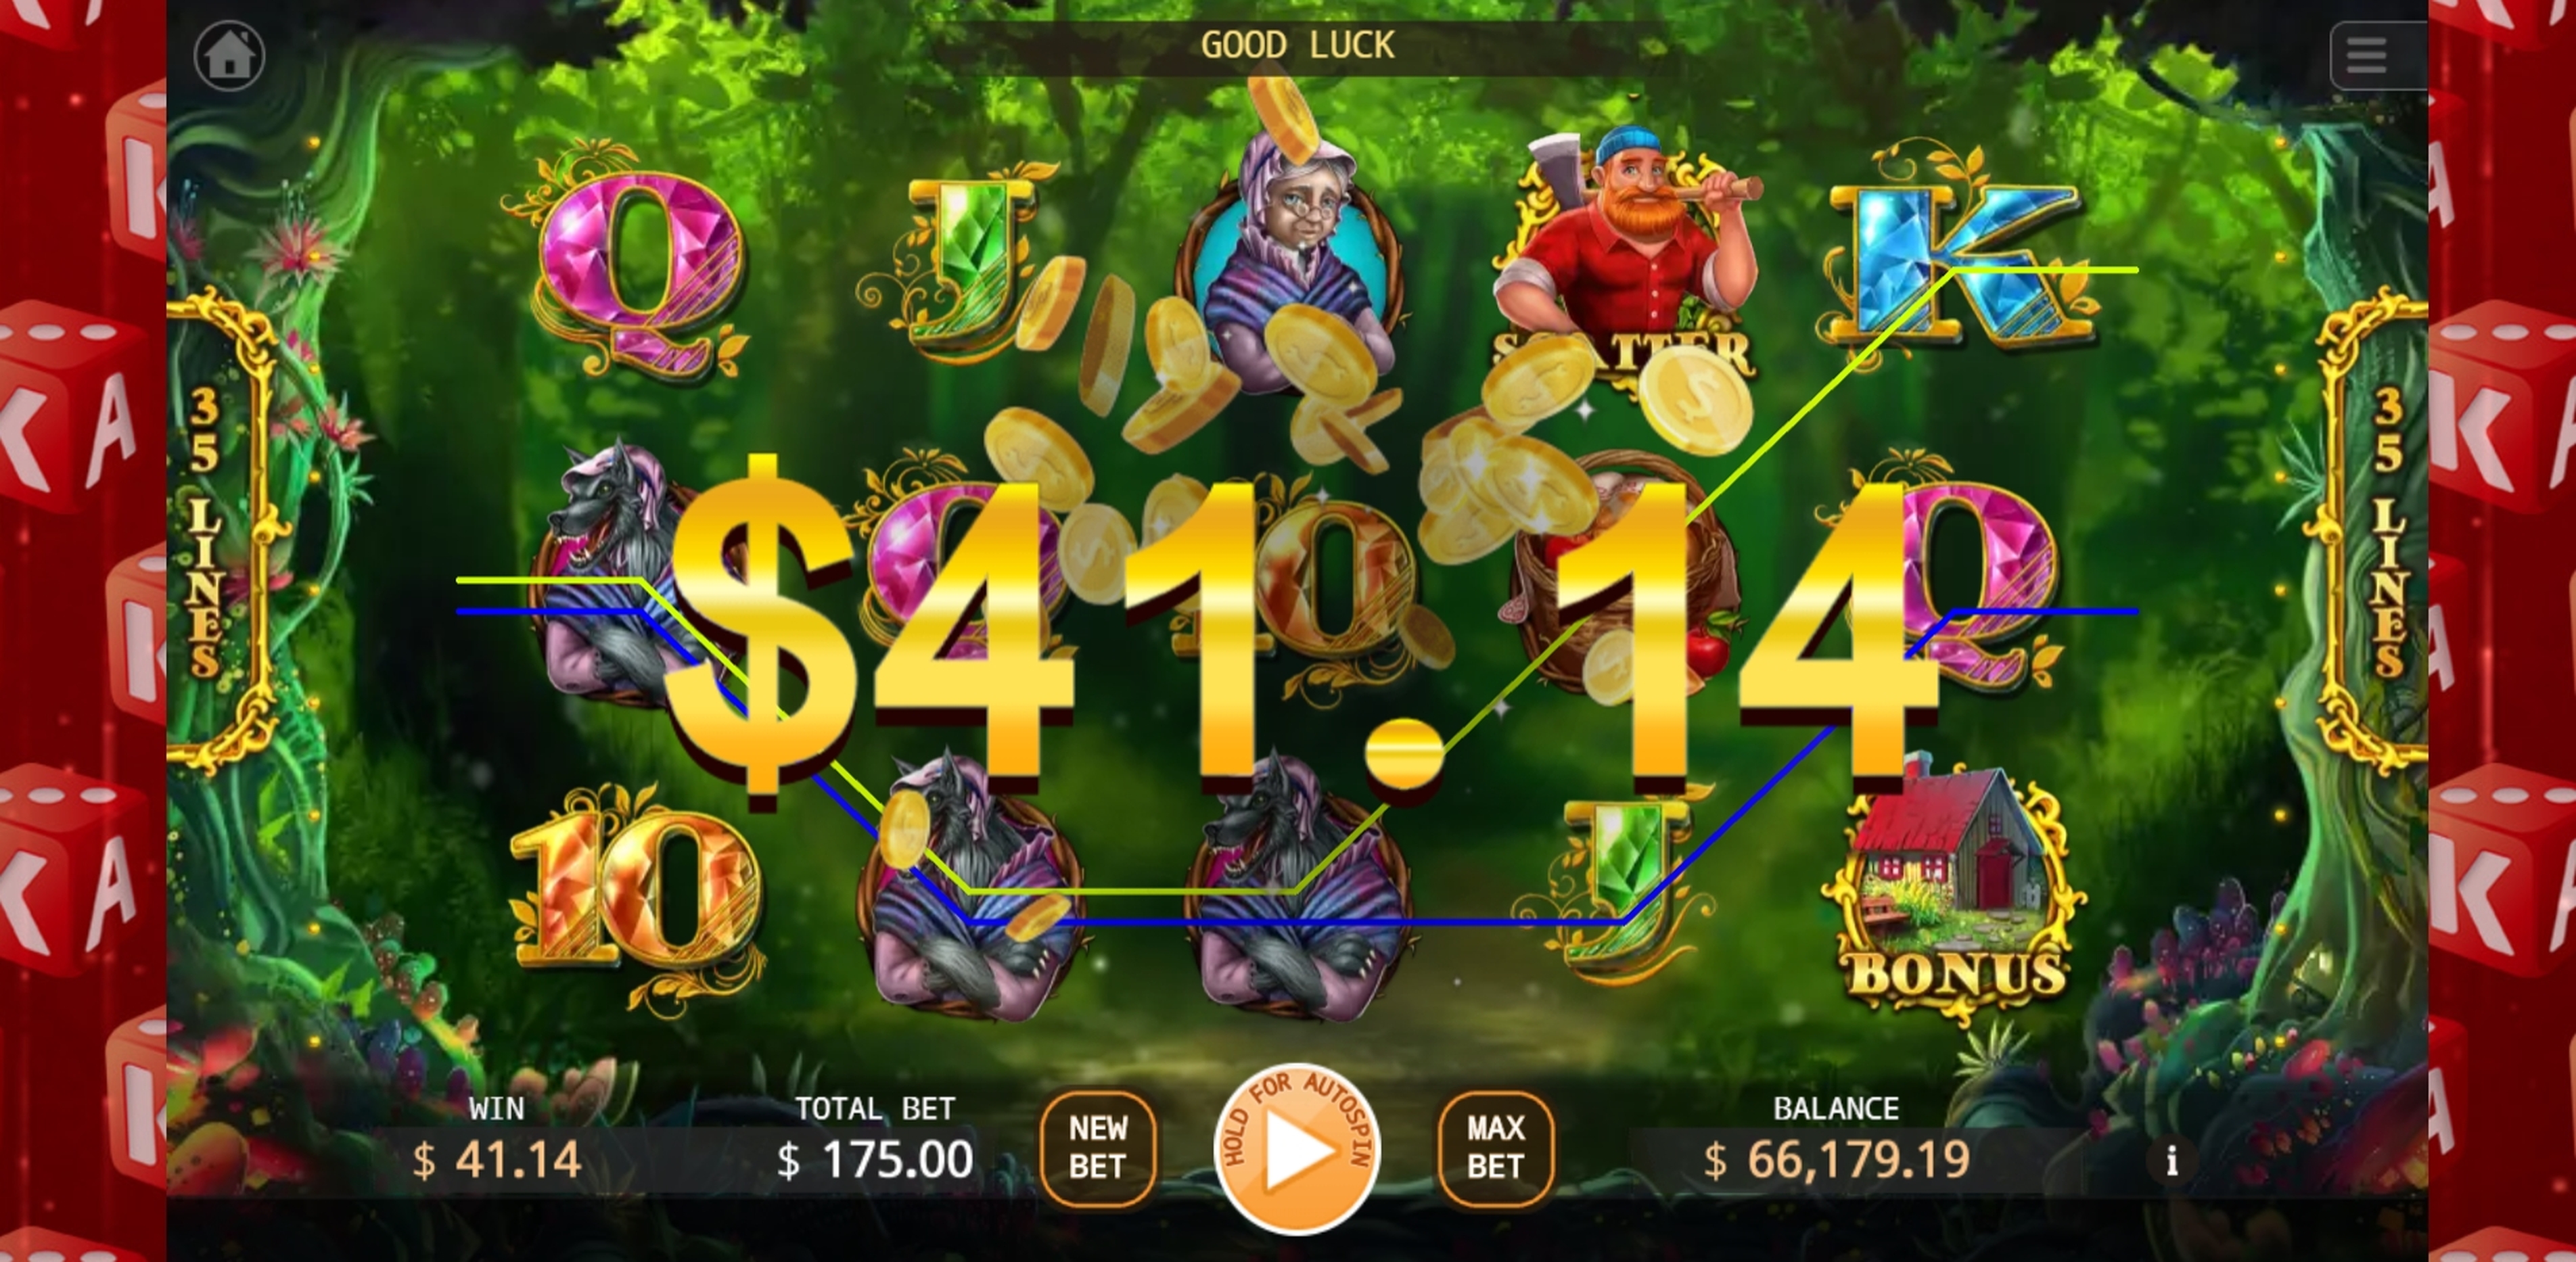 Win Money in Red Riding Hood Free Slot Game by KA Gaming